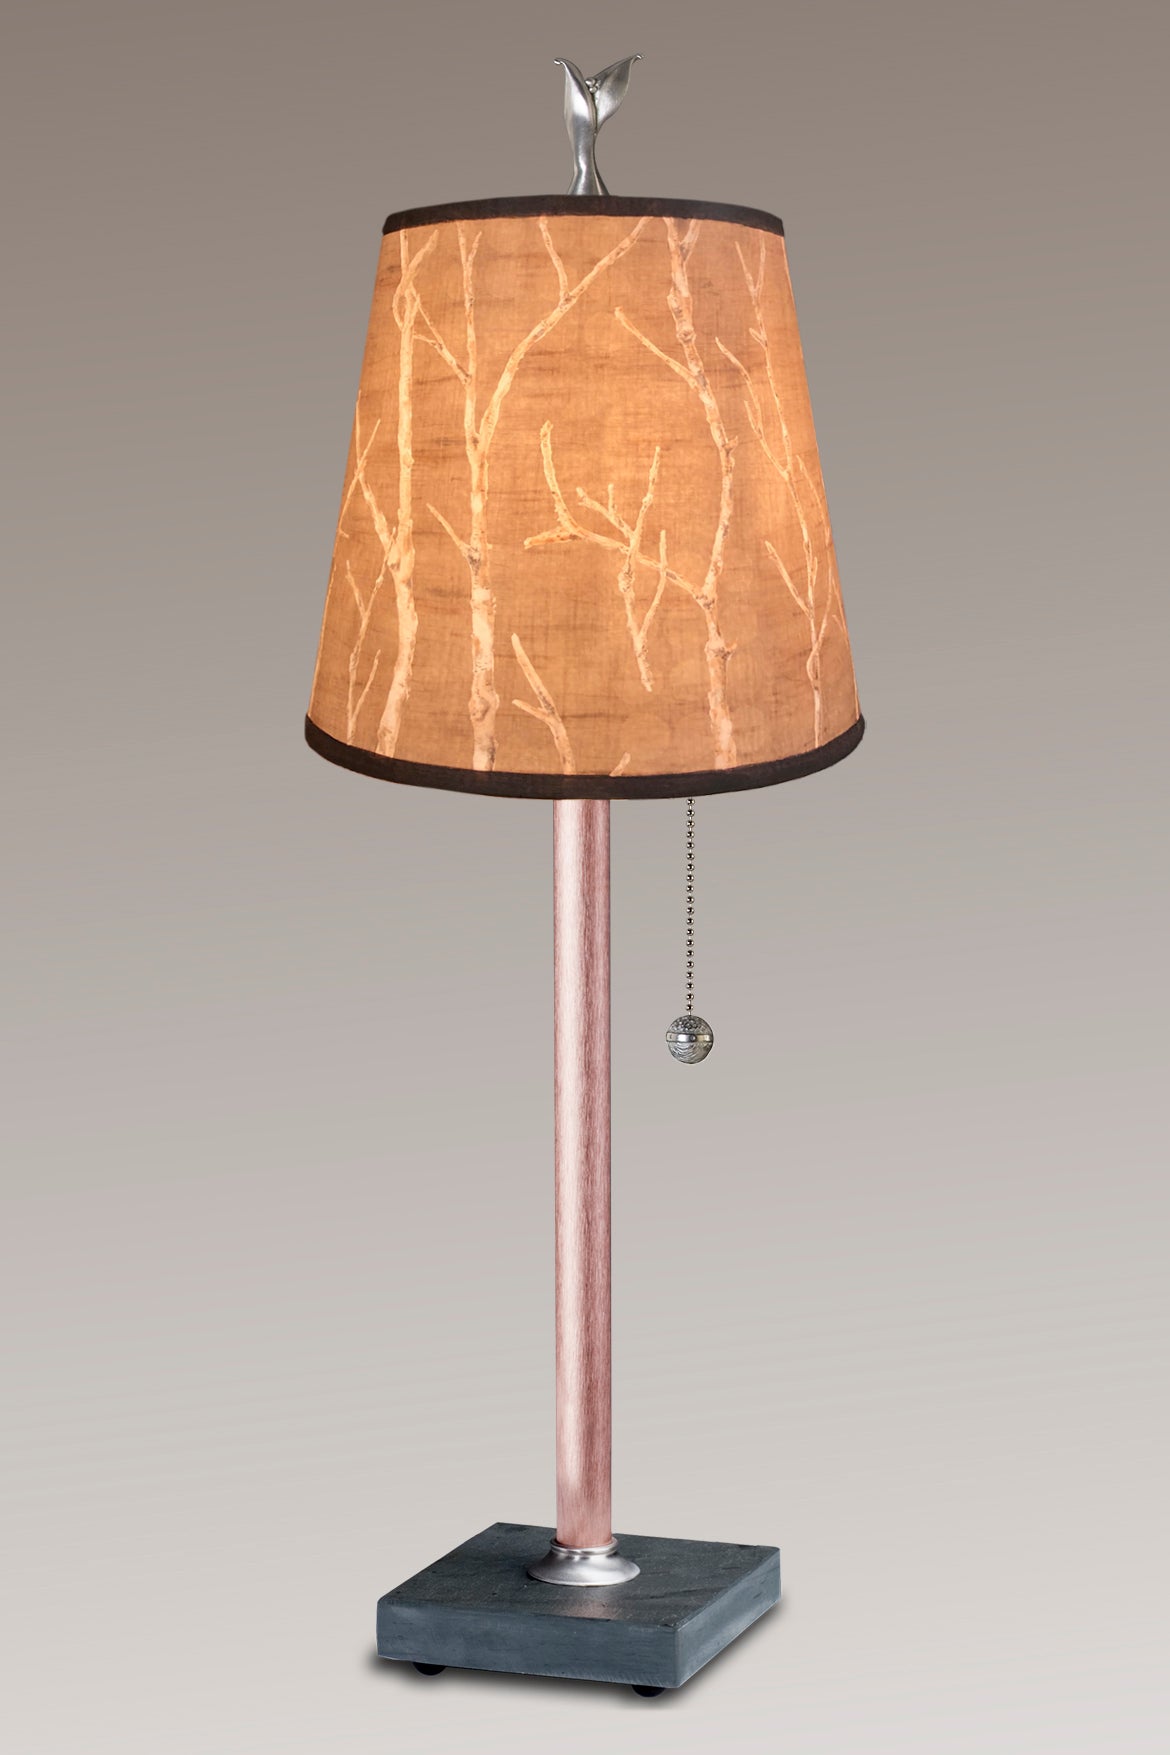 Janna Ugone &amp; Co Table Lamps Copper Table Lamp with Small Drum in Twigs